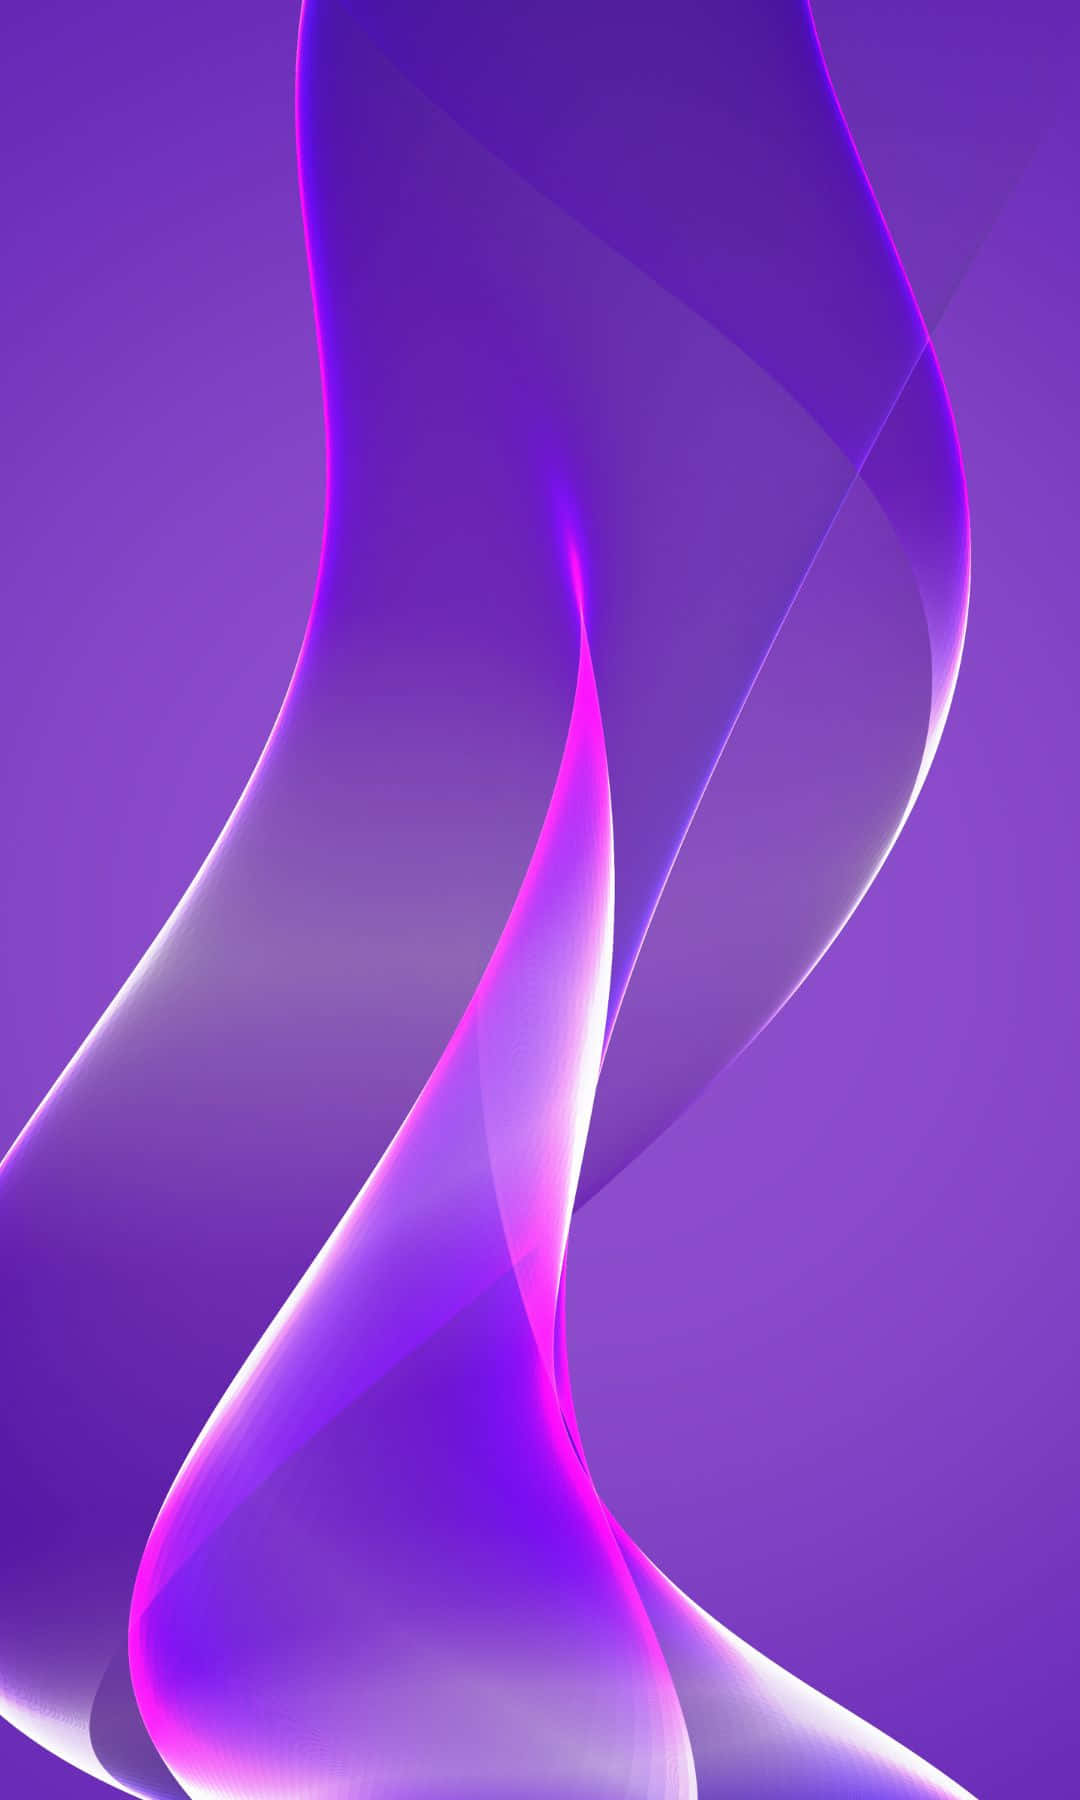 Glowing colors spread serenity into your life Wallpaper